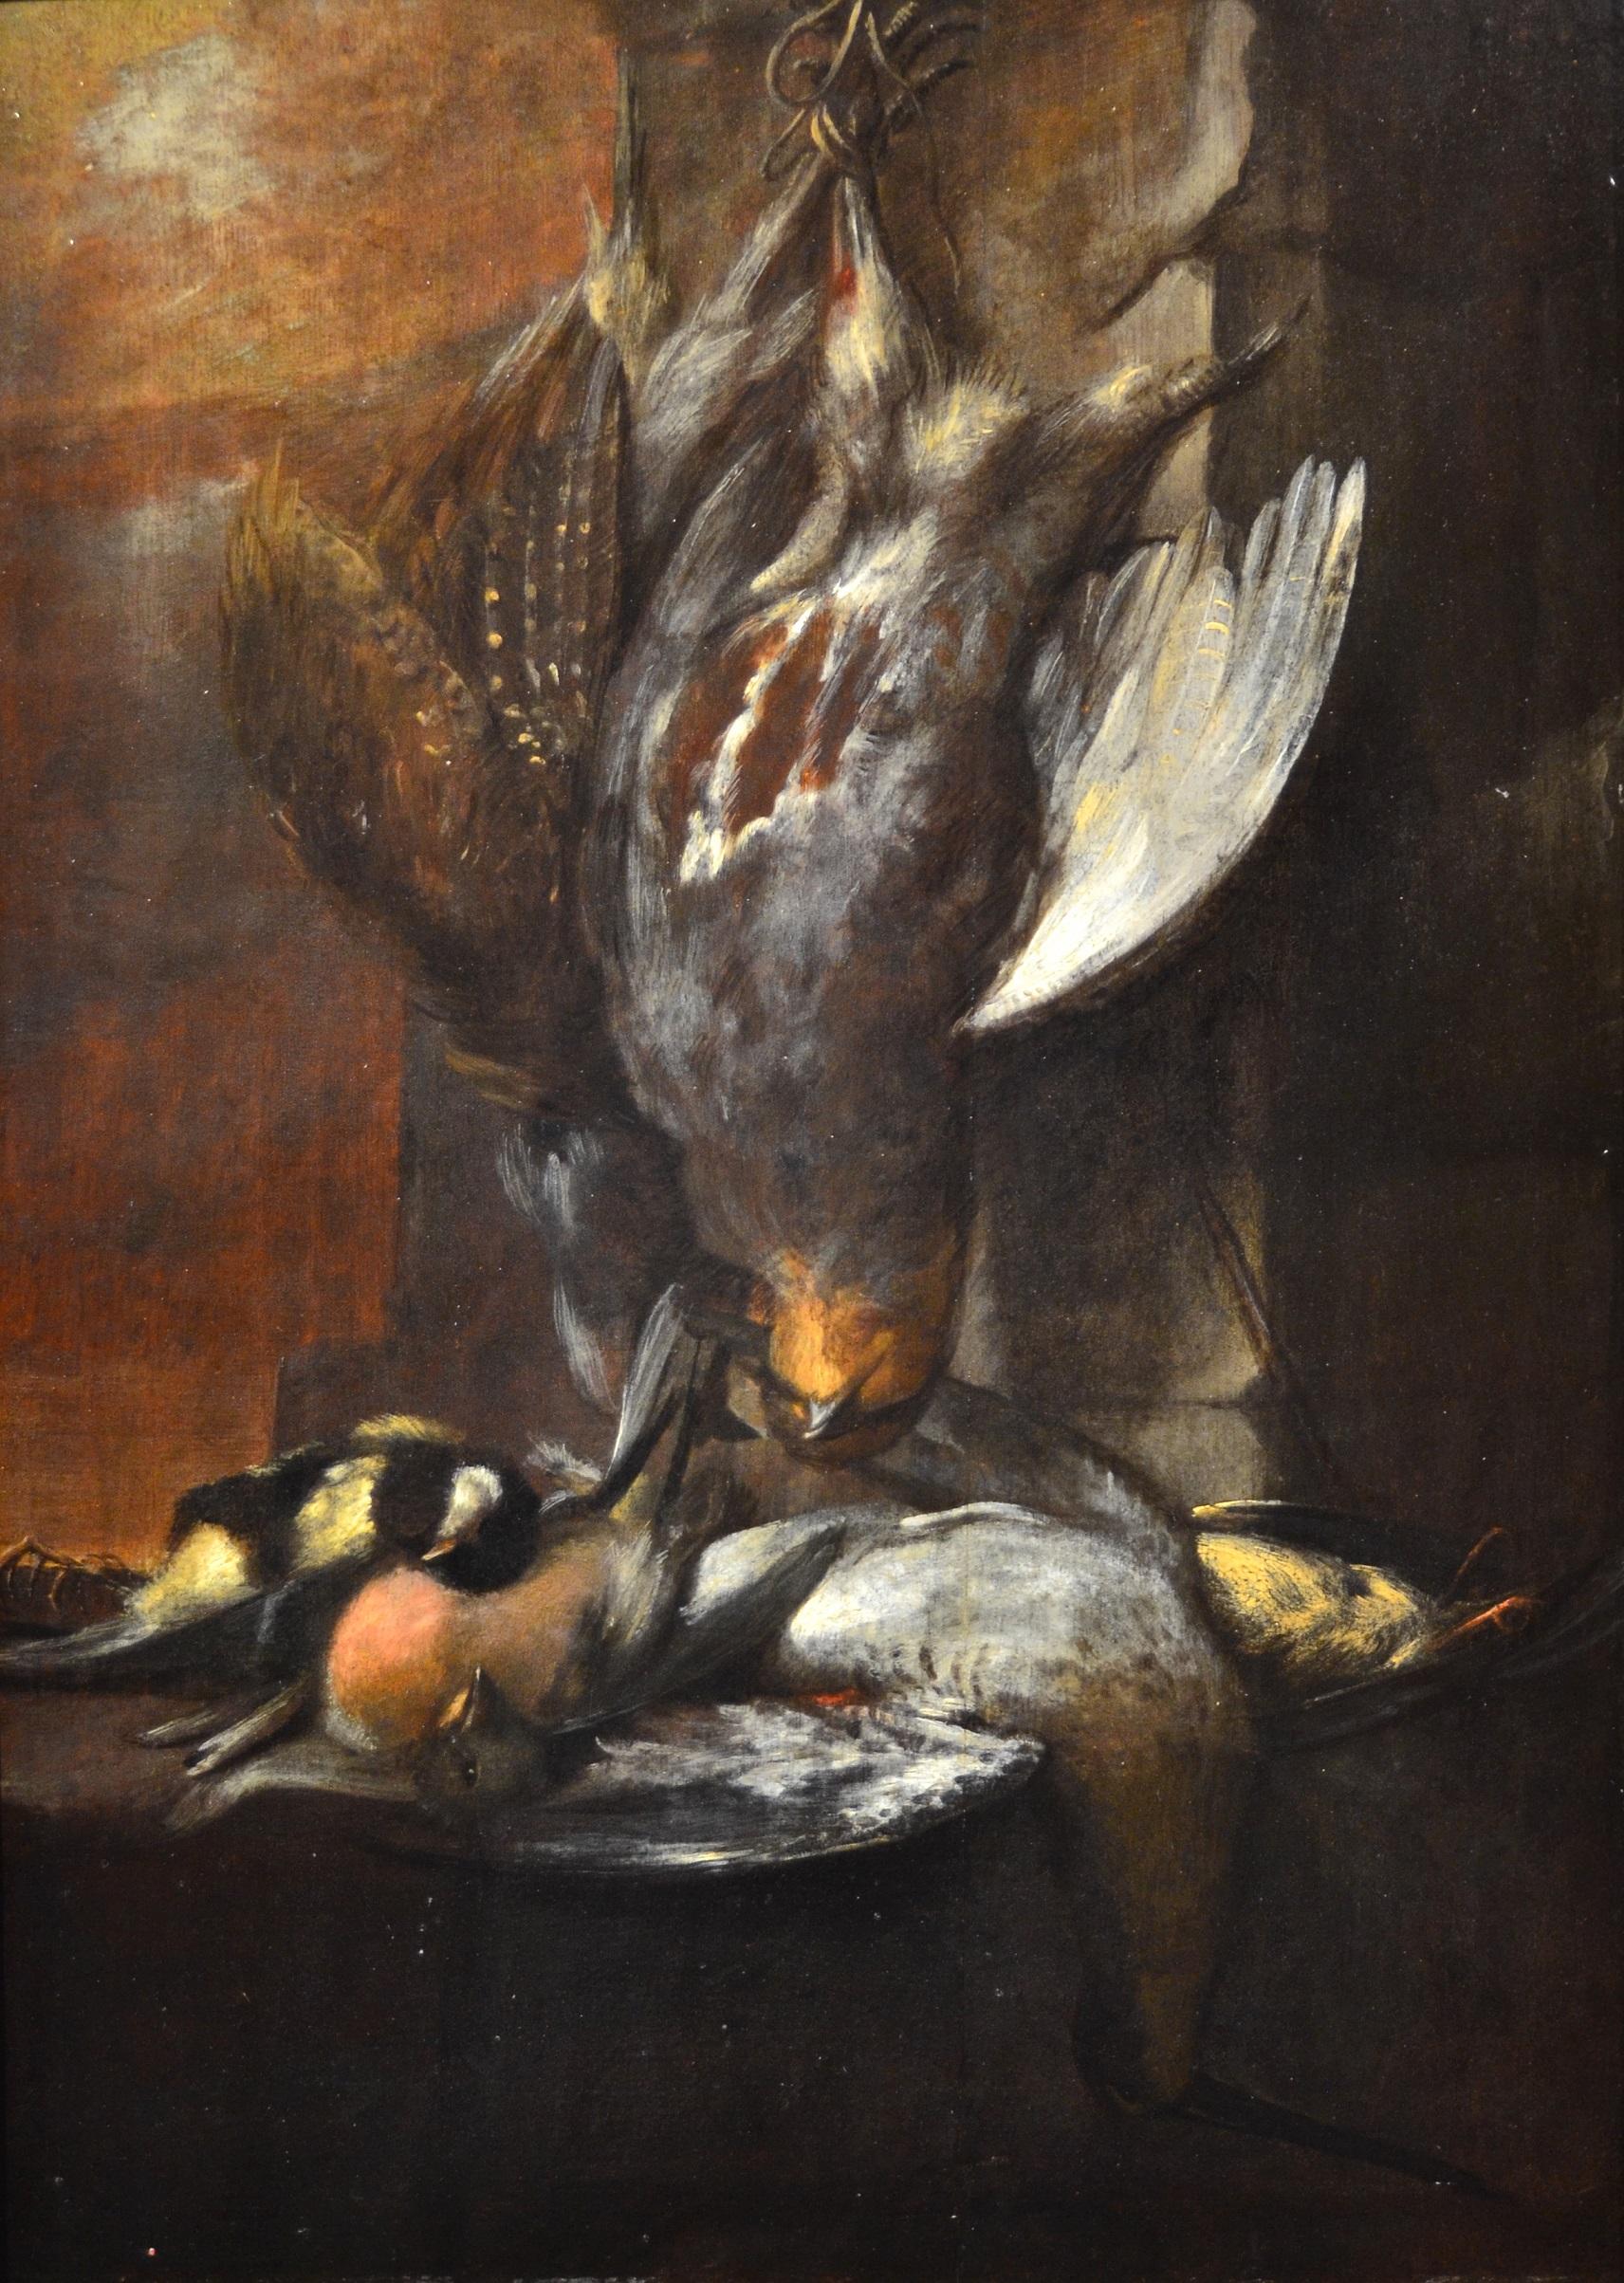 Still Life Bird Paint Oil on table 17/18th Century Italy Nature Landscape Flower - Painting by Felice Boselli (Piacenza, 1650 - Parma 1732), attributed